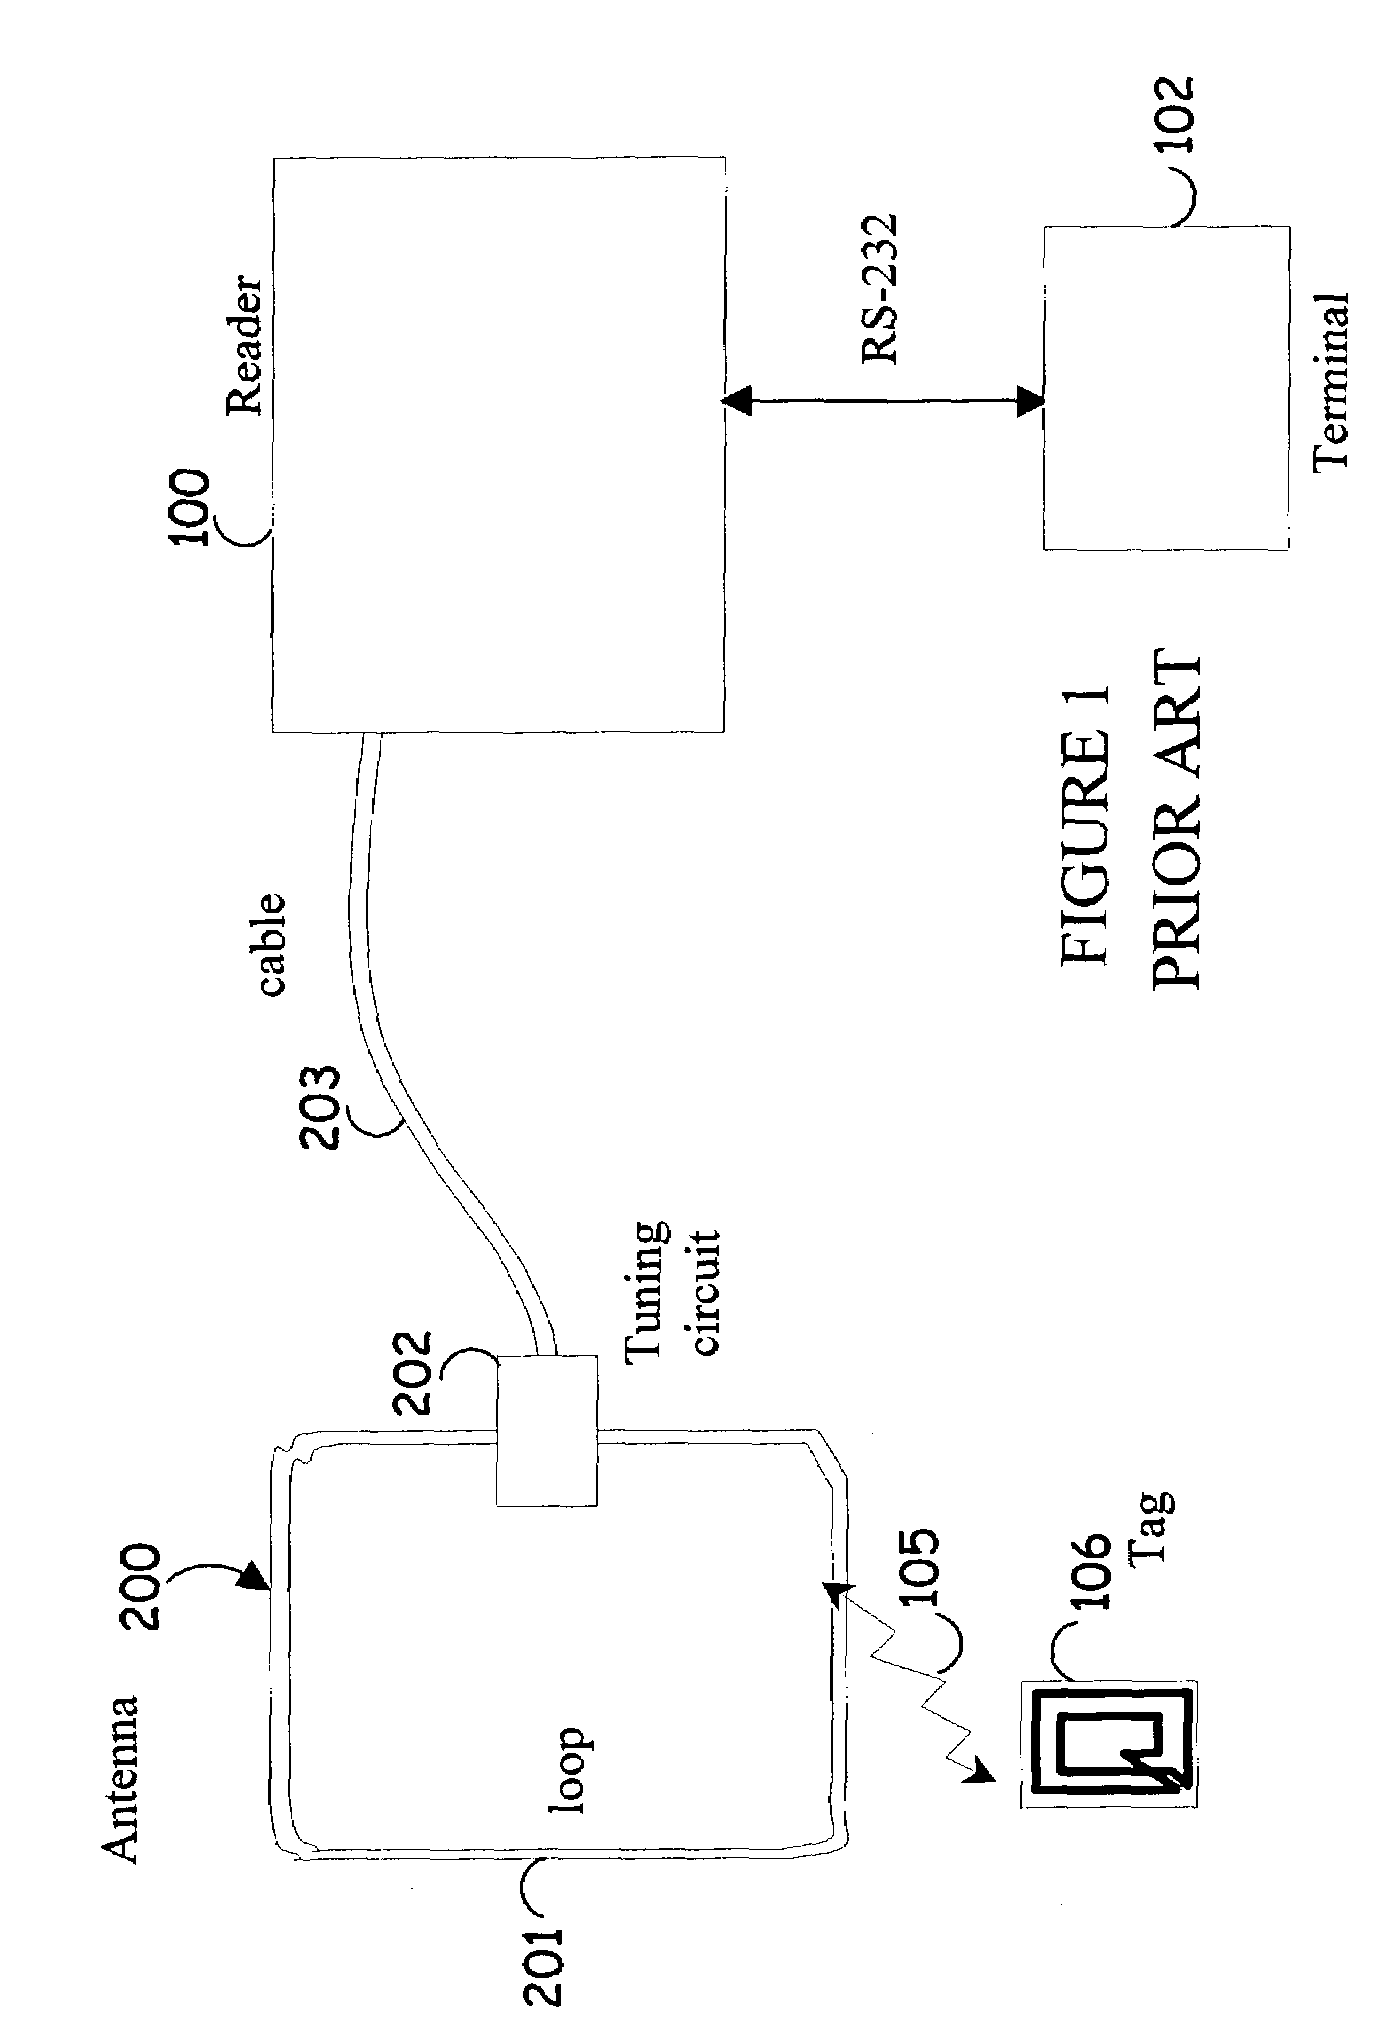 Intelligent station using multiple RF antennae and inventory control system and method incorporating same